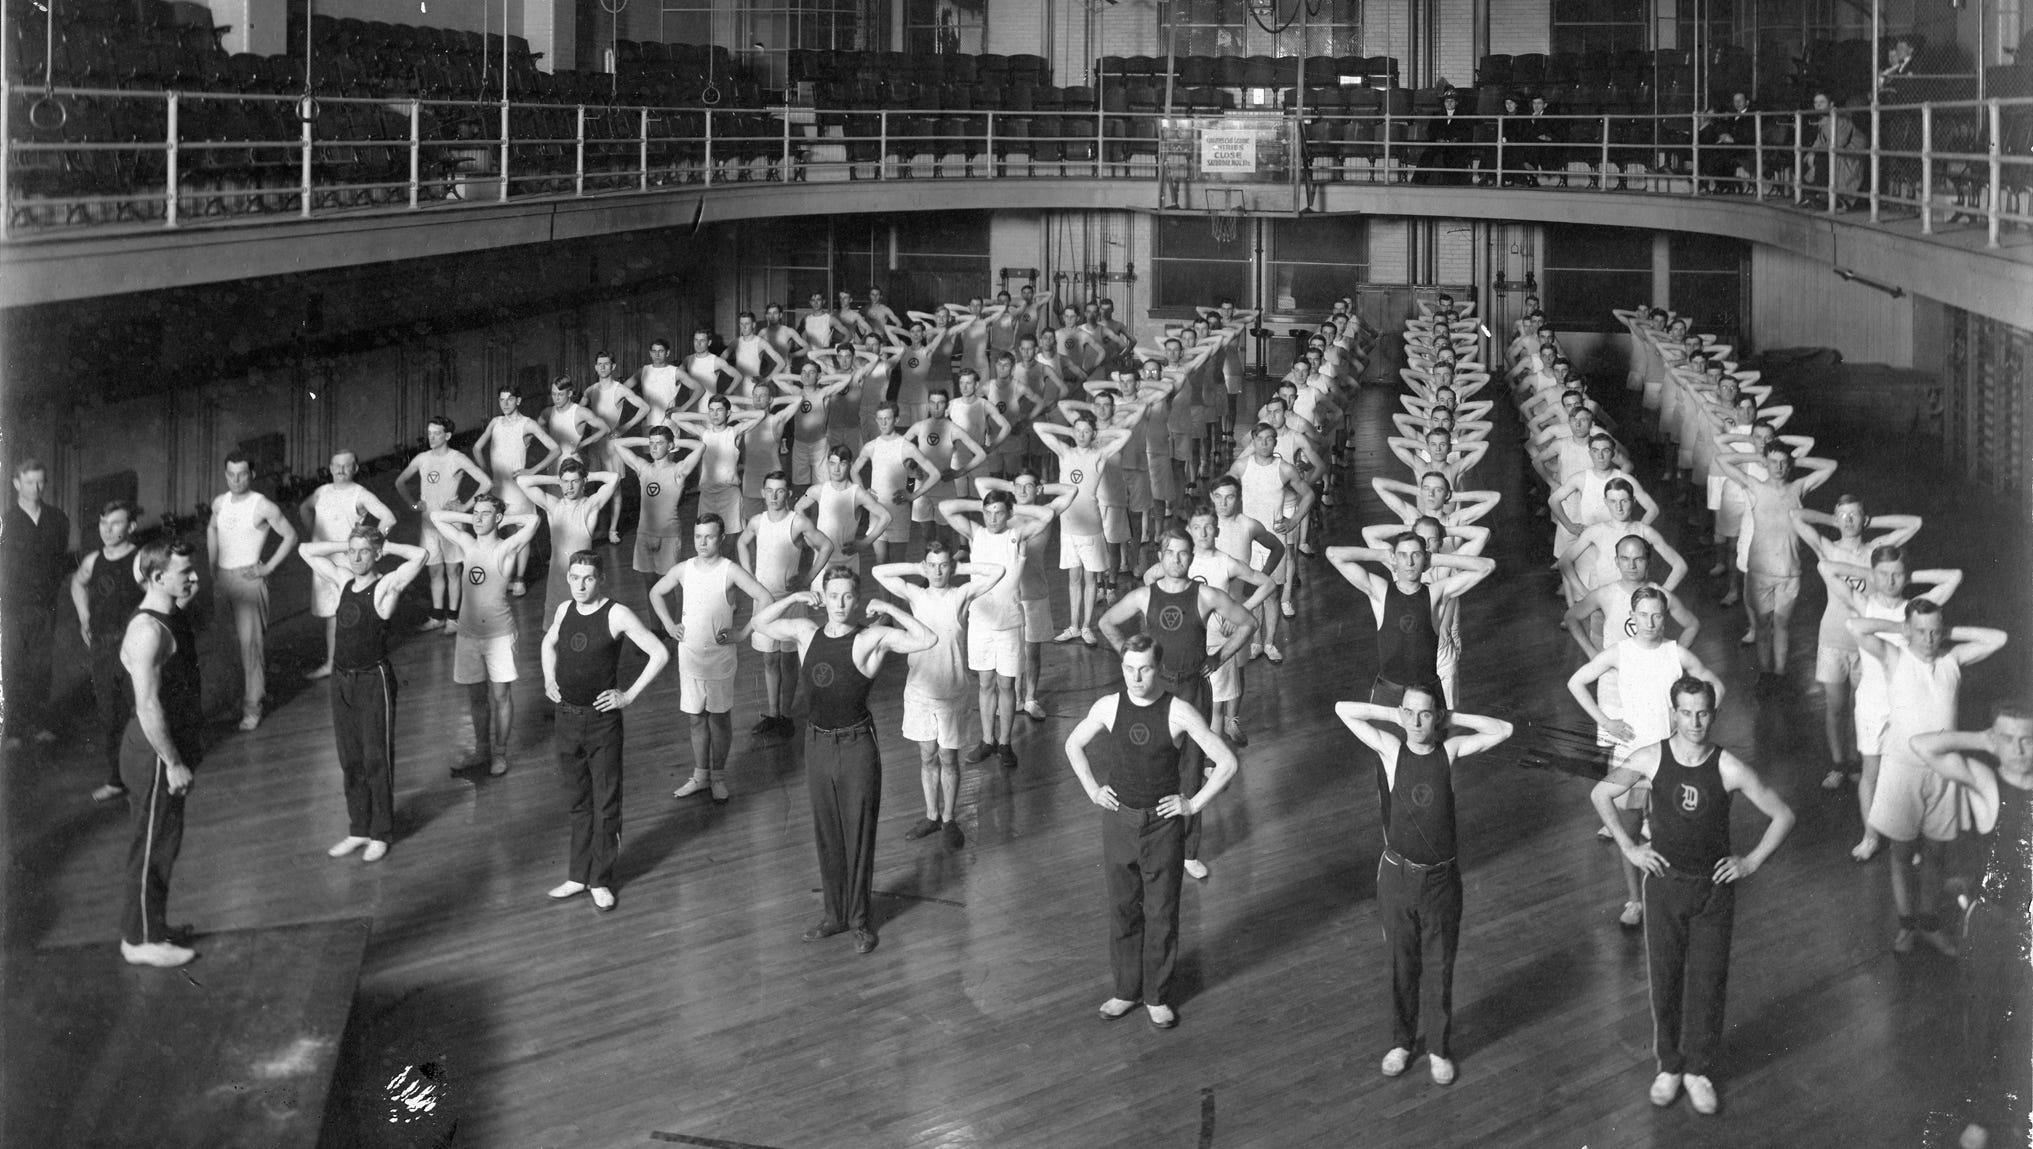 Men participate in an exercise class at Detroit's YMCA in 1910.